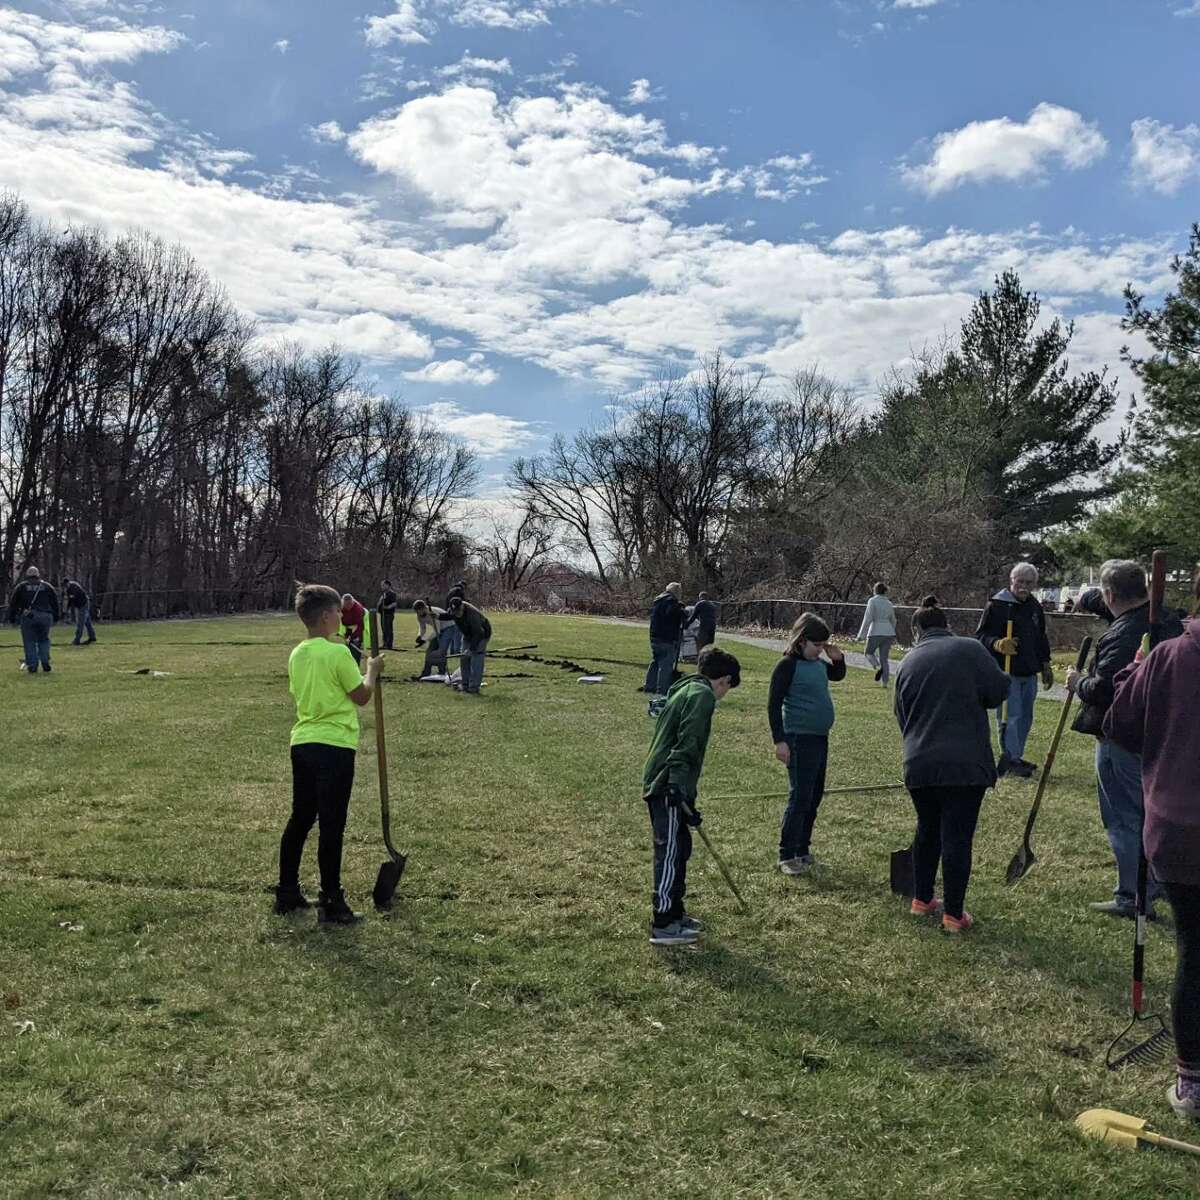 Volunteers help repair a field at Make-A-Wish Connectict, 56 Commerce Dive, Trumbull, on March 26, 2022